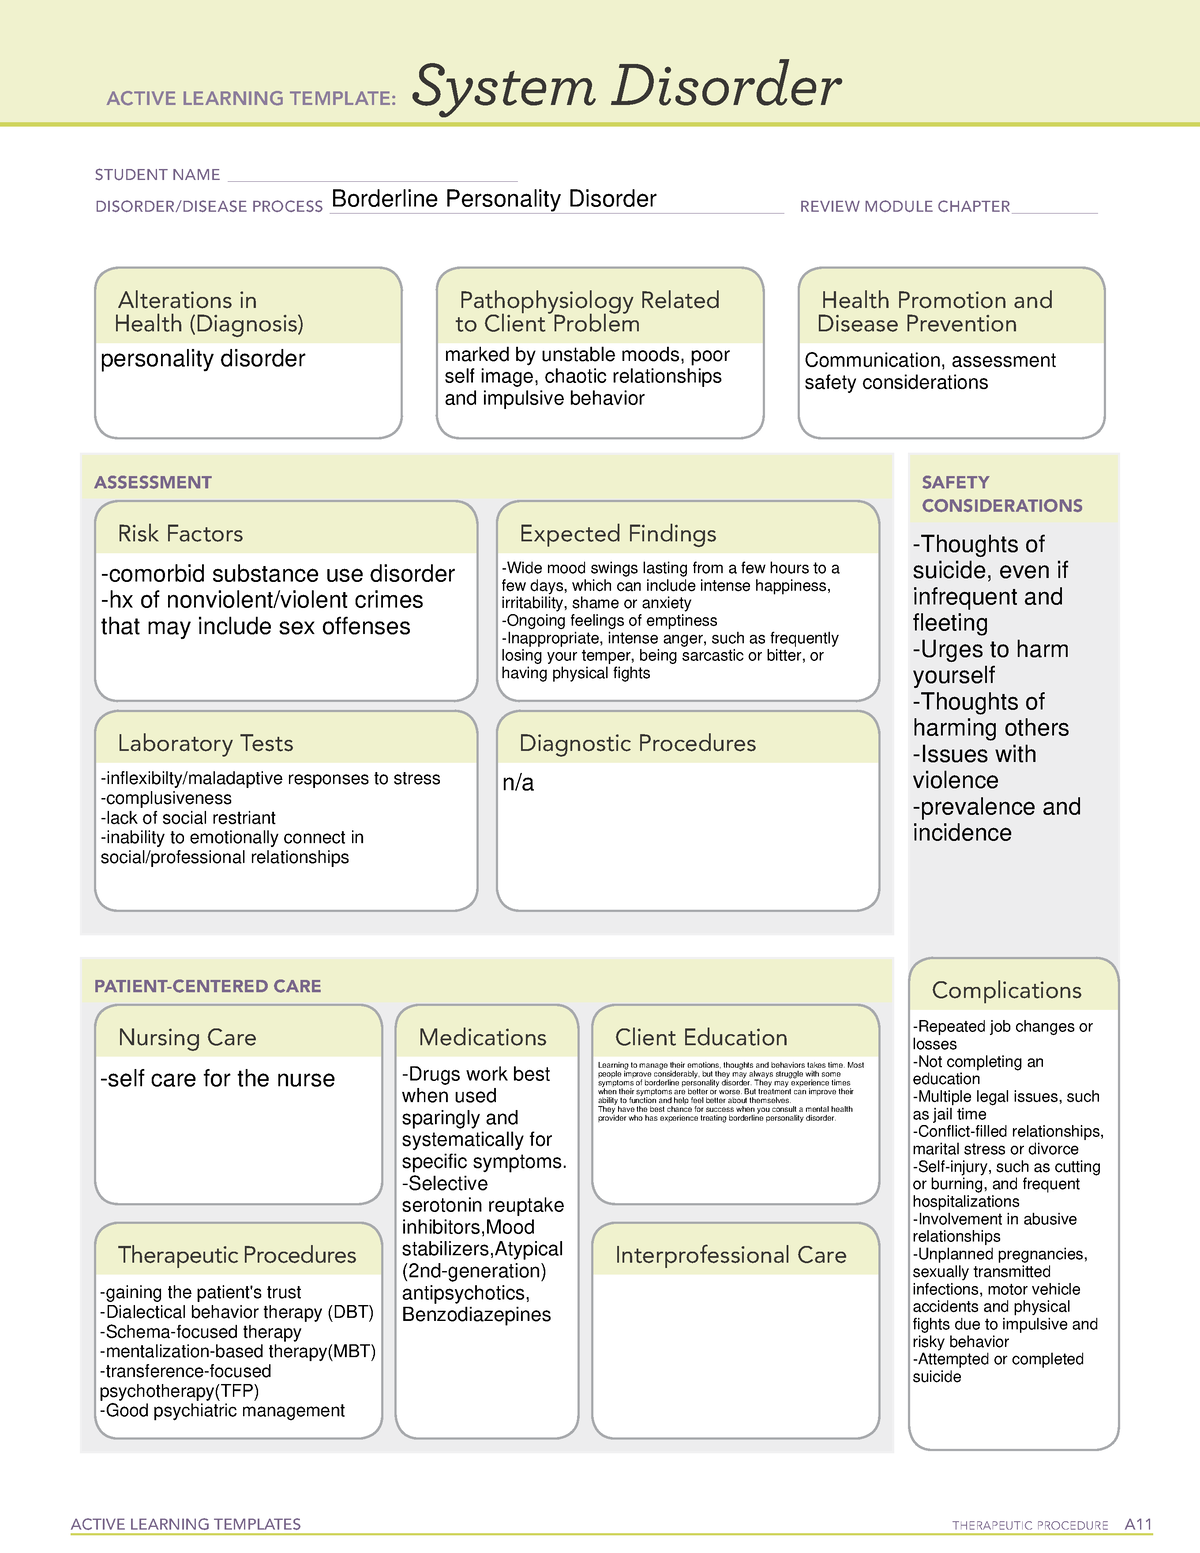 System disorder BPD ATI Active Learning Template - ACTIVE LEARNING ...